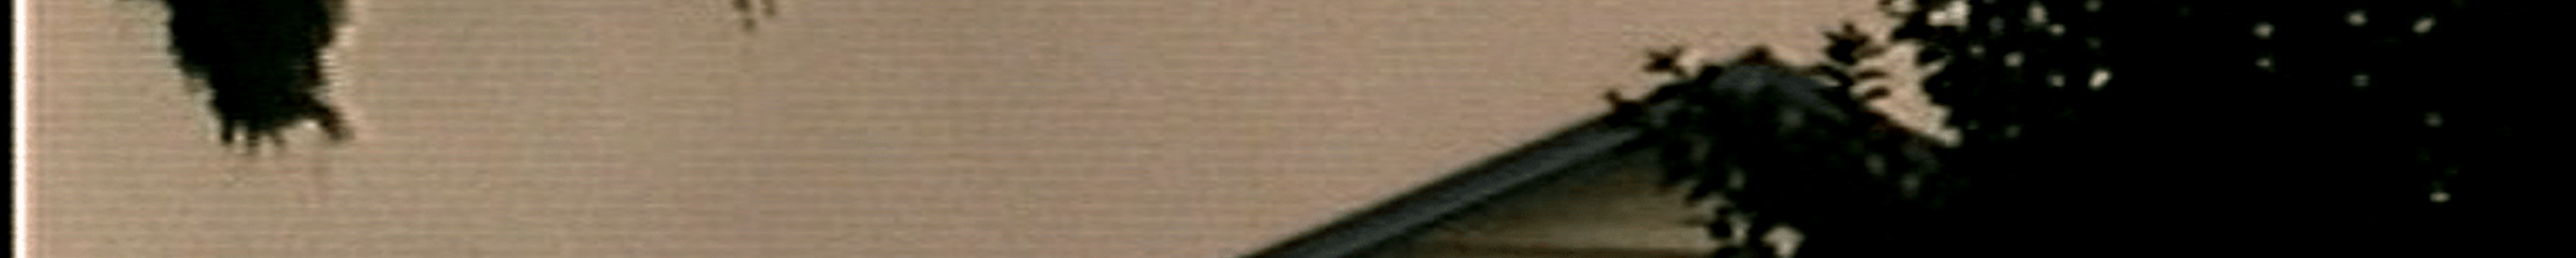 Grainy image of a house